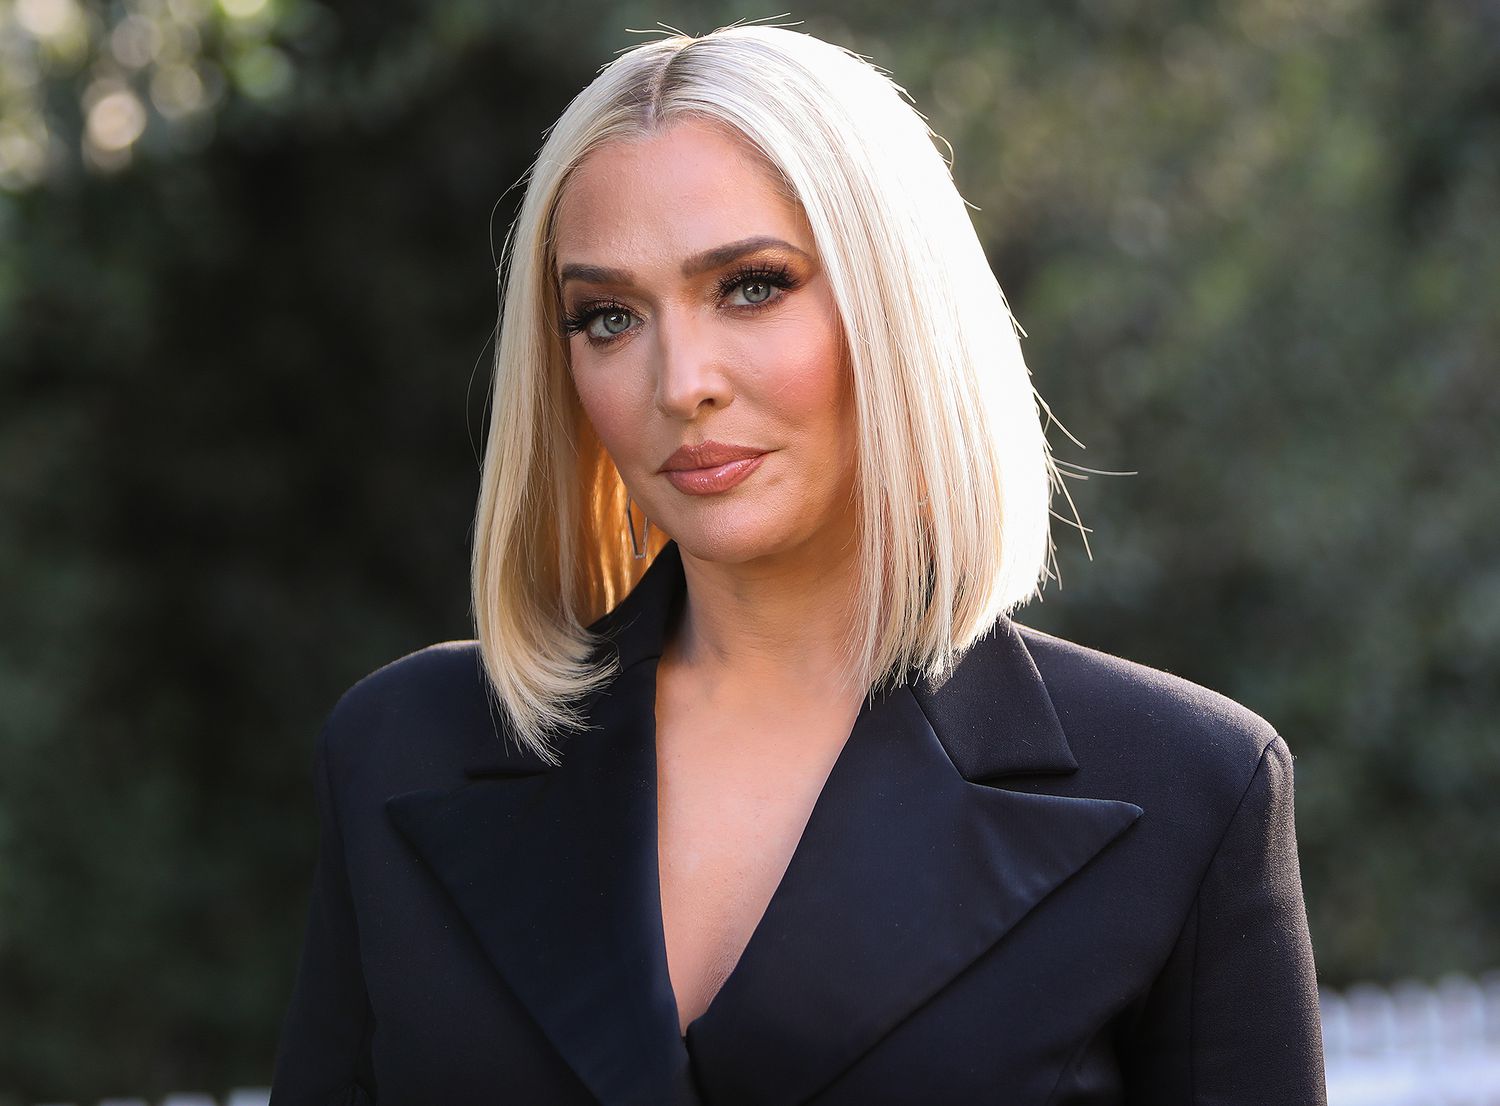 Erika Girardi Opens Up About Considering Suicide Multiple Times Amid Tom Girardi's Legal Struggles